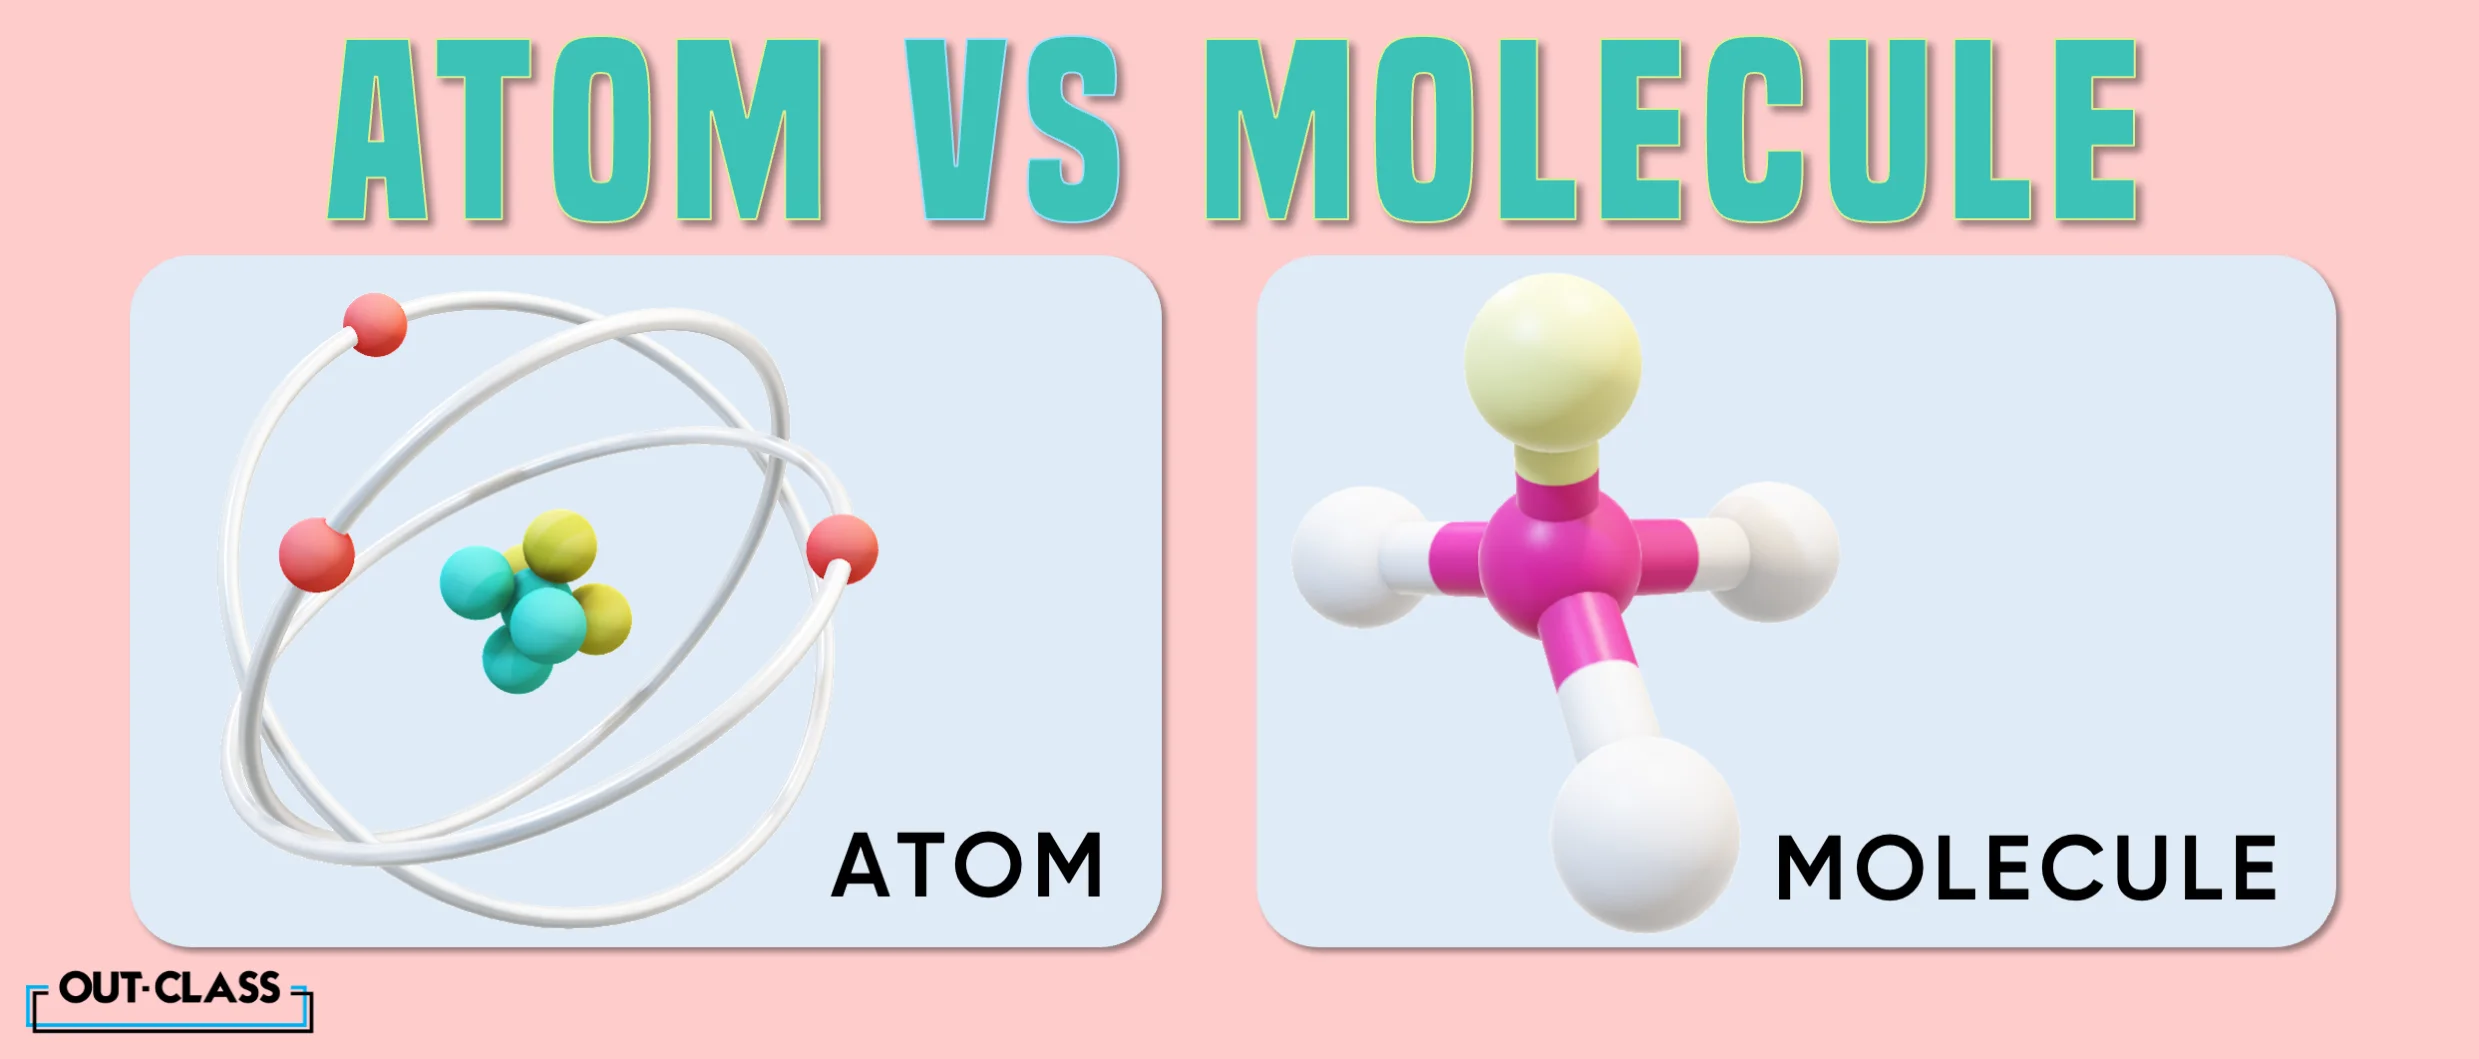 the image illustrates what is the difference between an atom and a molecule